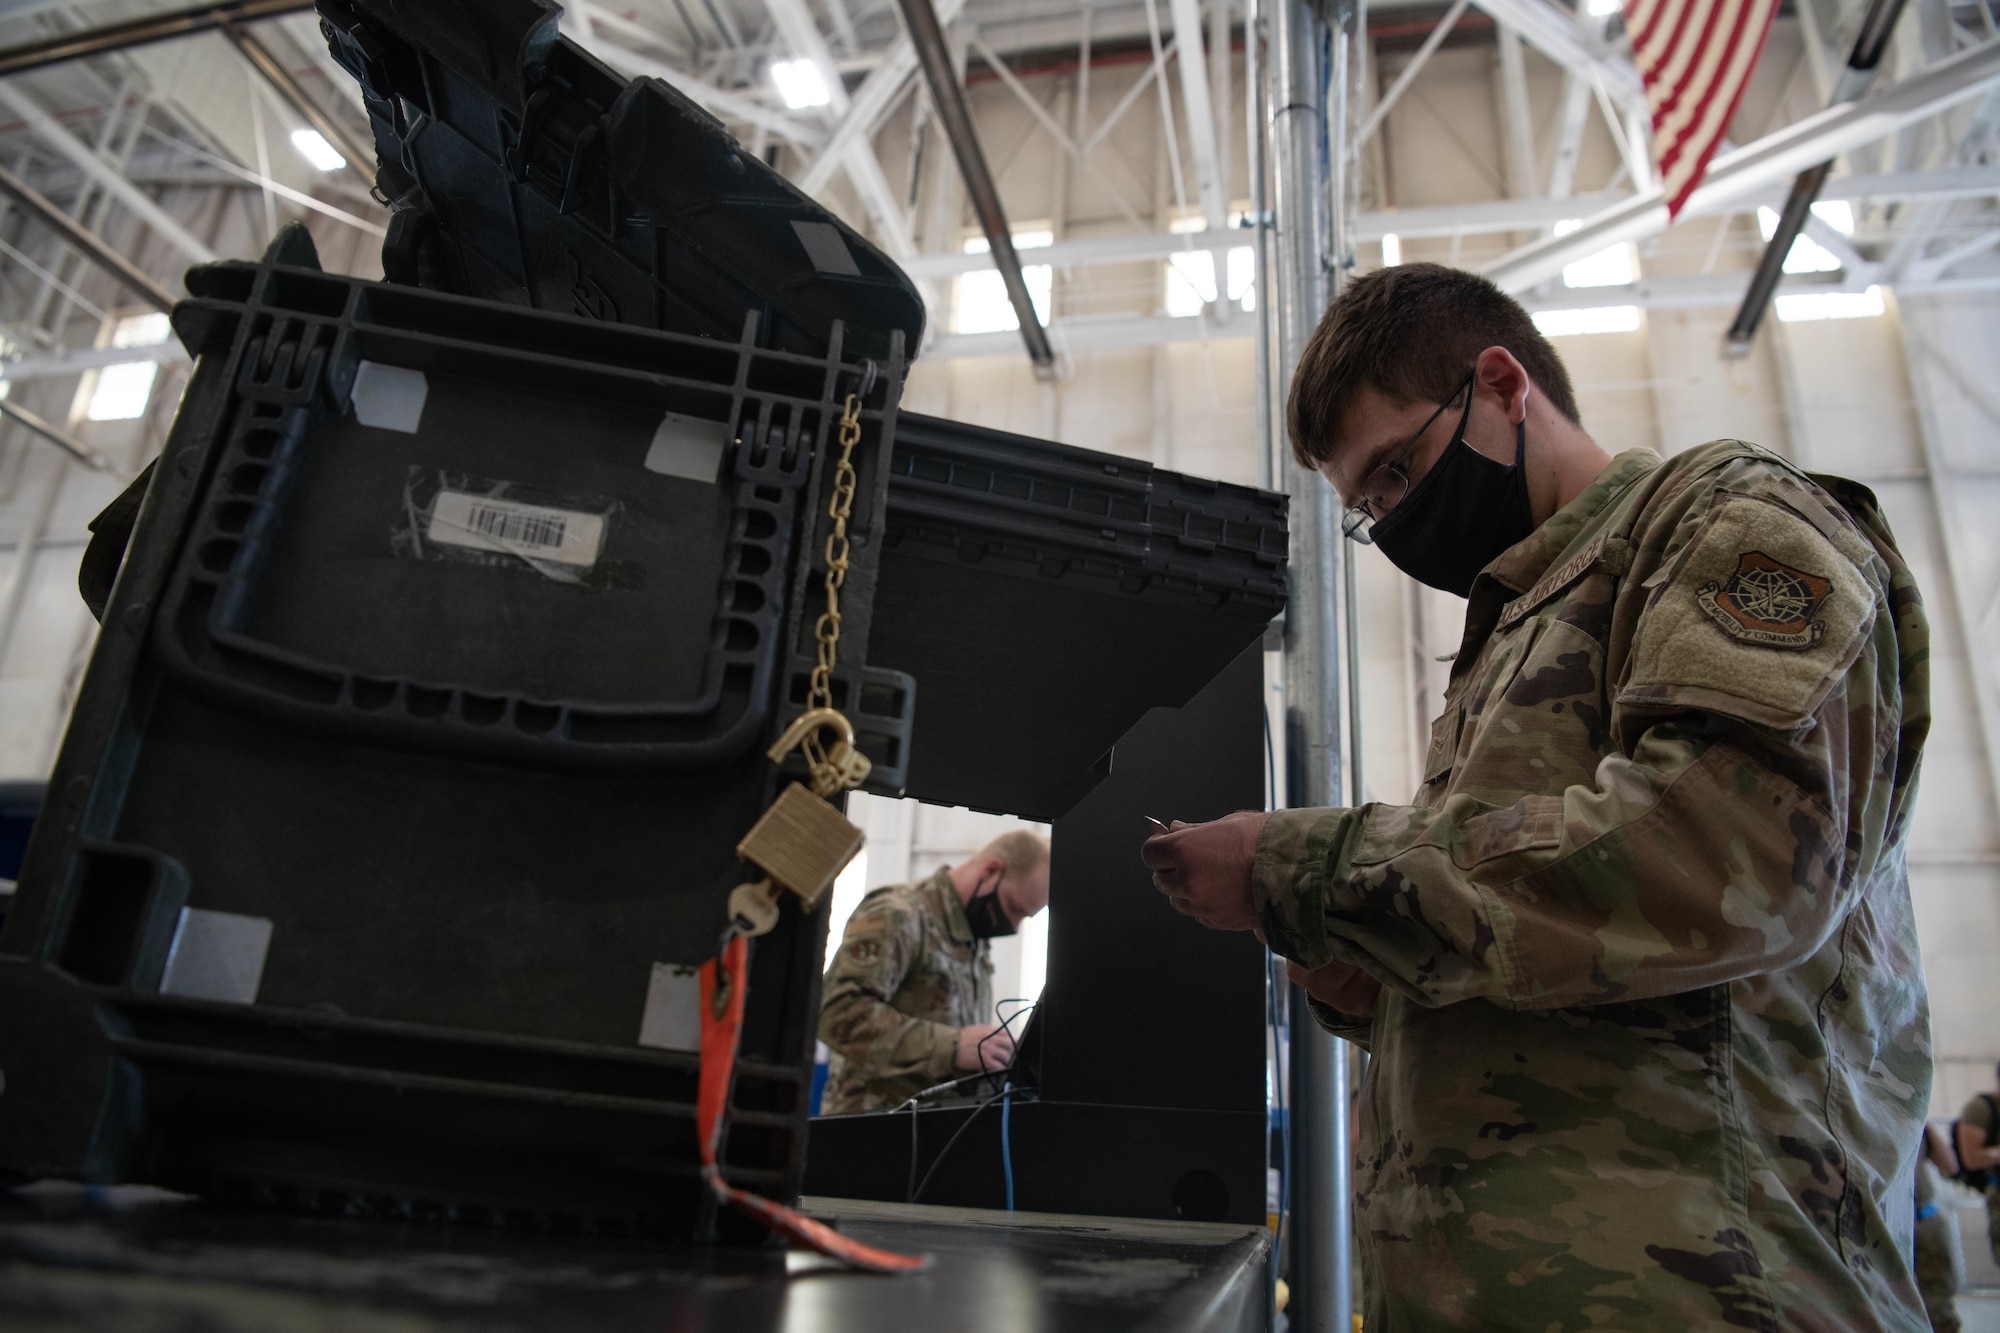 Airman 1st Class Victor Fix, 22nd Aircraft Maintenance Squadron support flight journeyman, inspects a toolkit during checkout Aug. 24, 2021, at McConnell Air Force Base, Kansas. Three additional checkout counters were included in the redesign of the consolidated tool kit and are expected to reduce checkout times by 50 percent per customer. (U.S. Air Force photo by Senior Airman Marc Garcia)